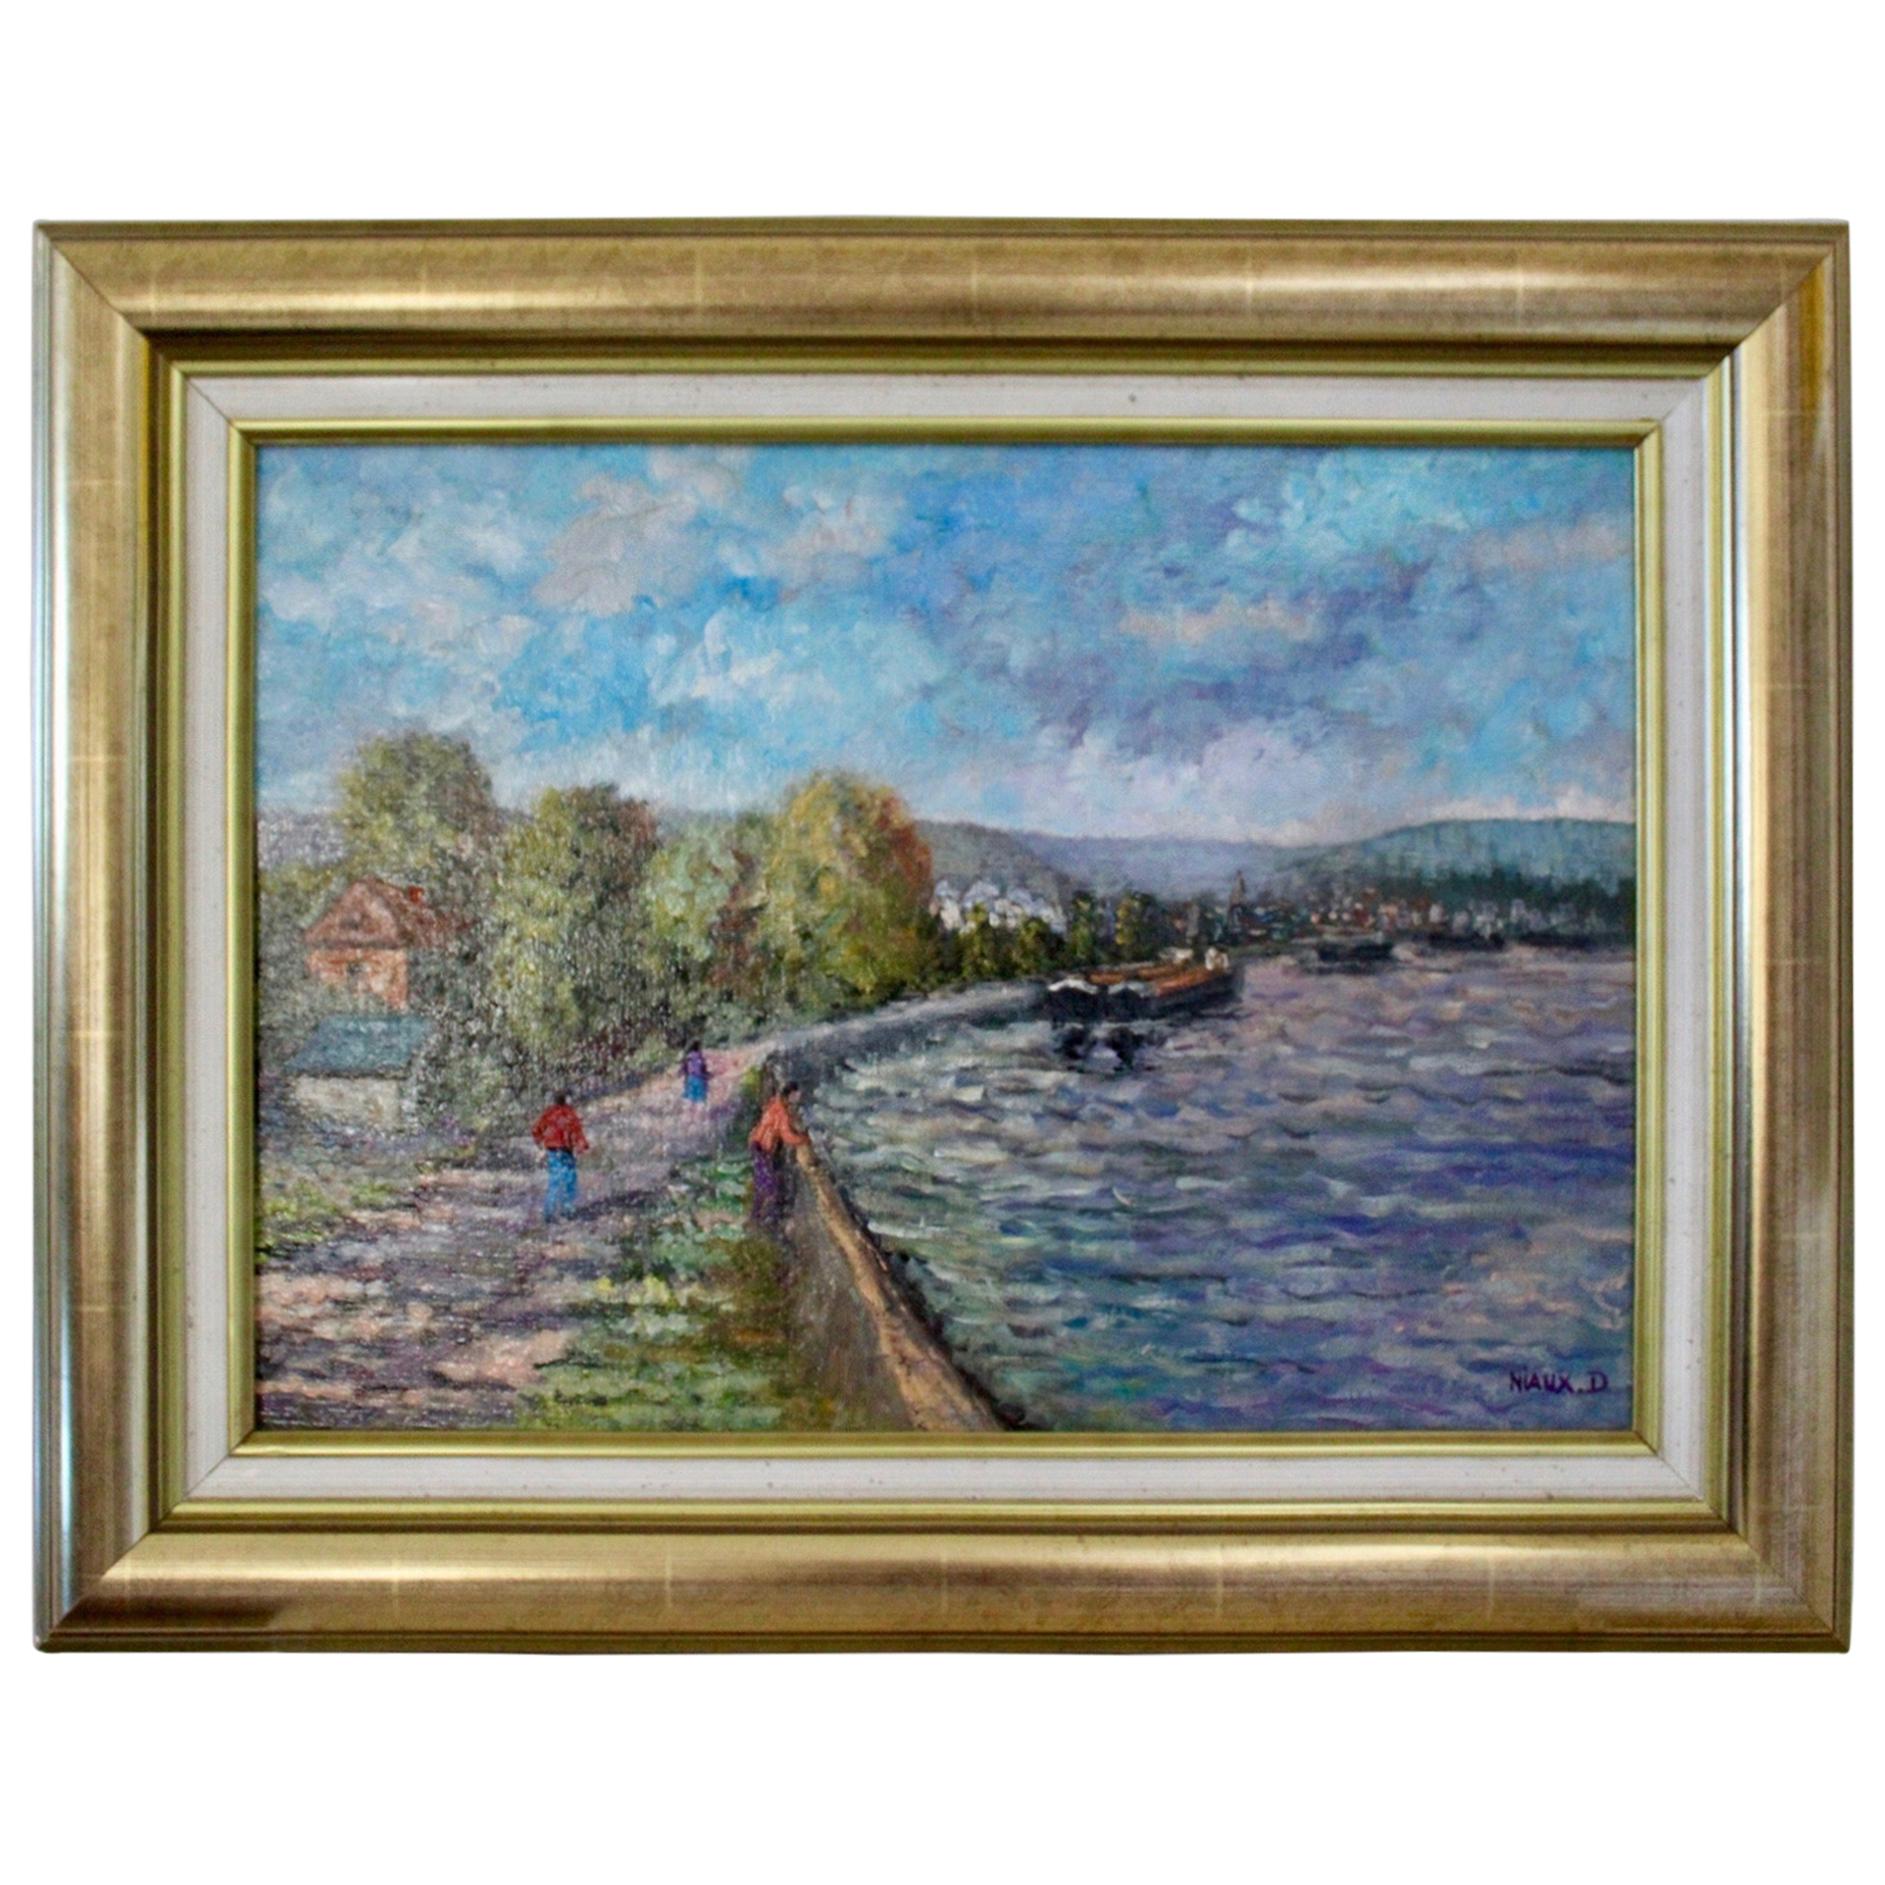 Bank of Seine River Oil Painting by D.Niaux France, 1990 For Sale